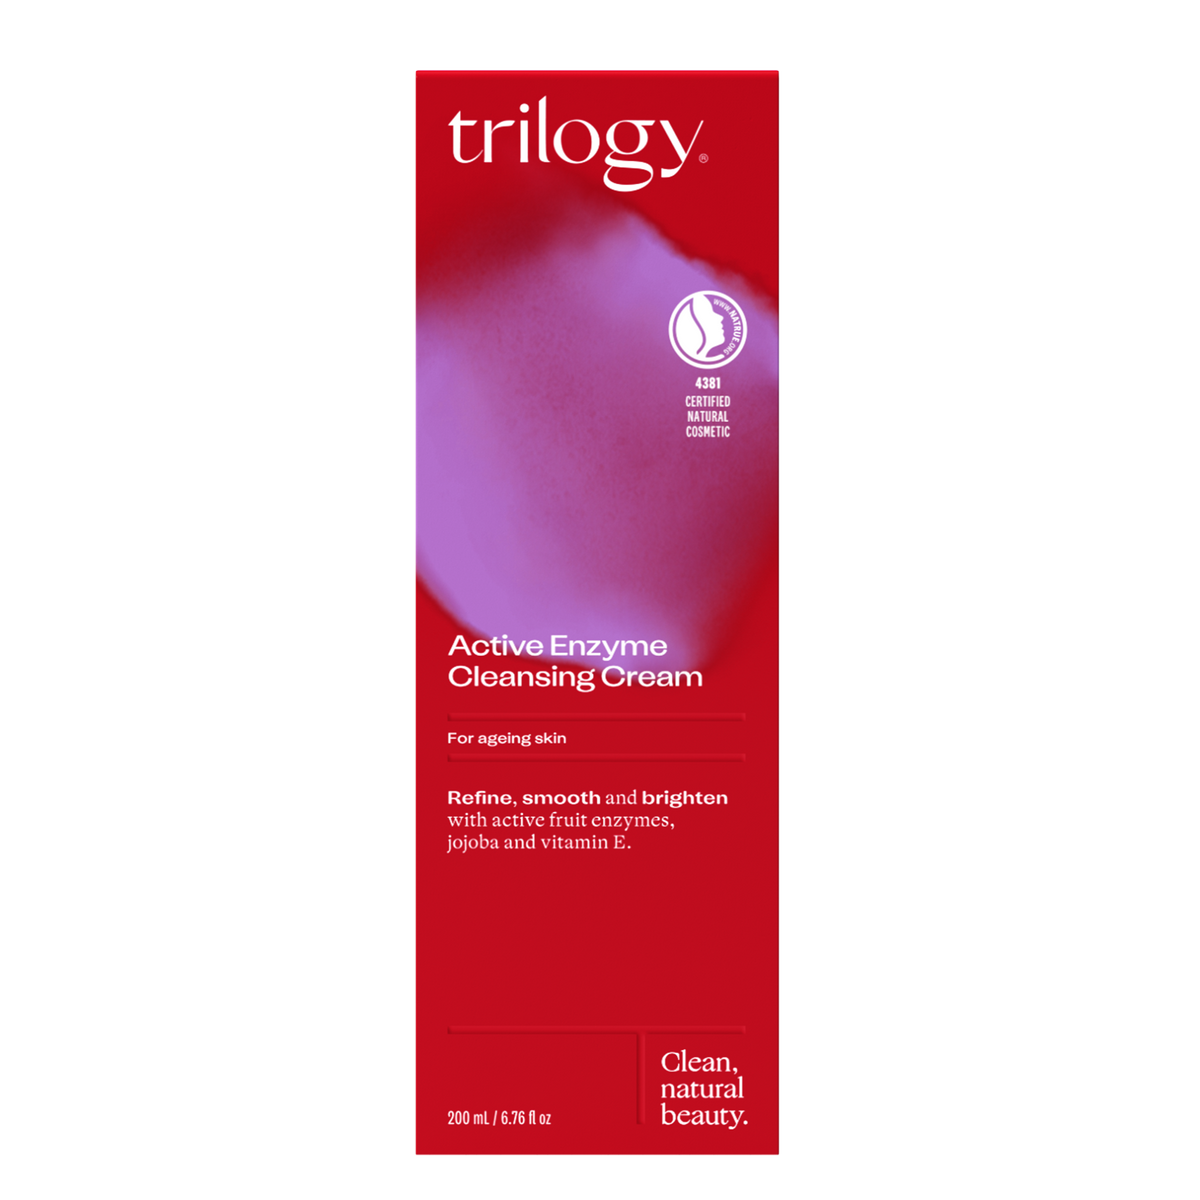 TRILOGY Active Enzyme Cleansing Cream (200ml)